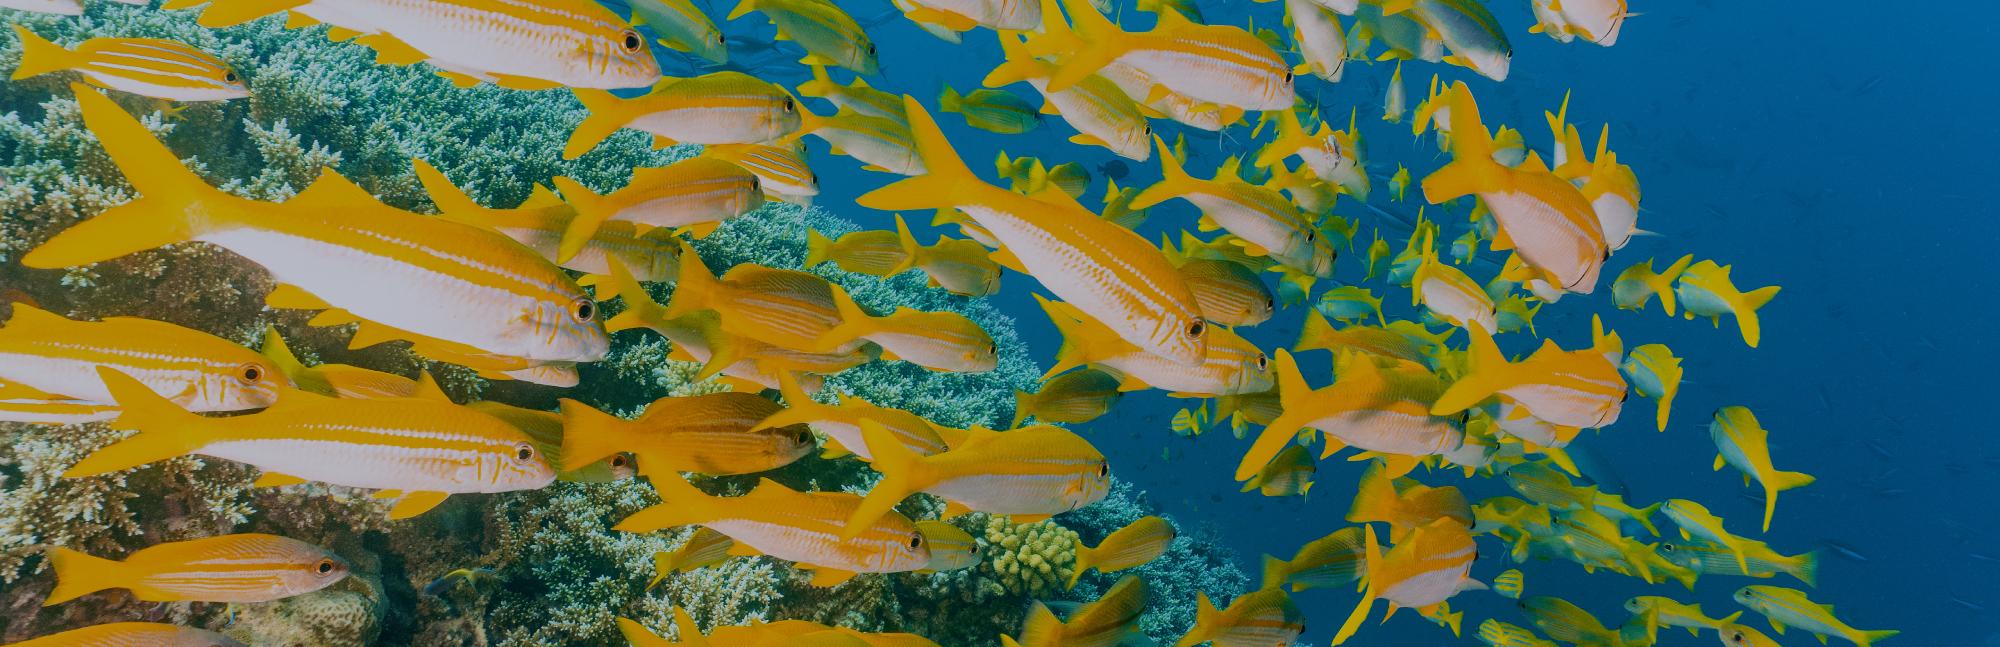 A shoal of yellow and white fish